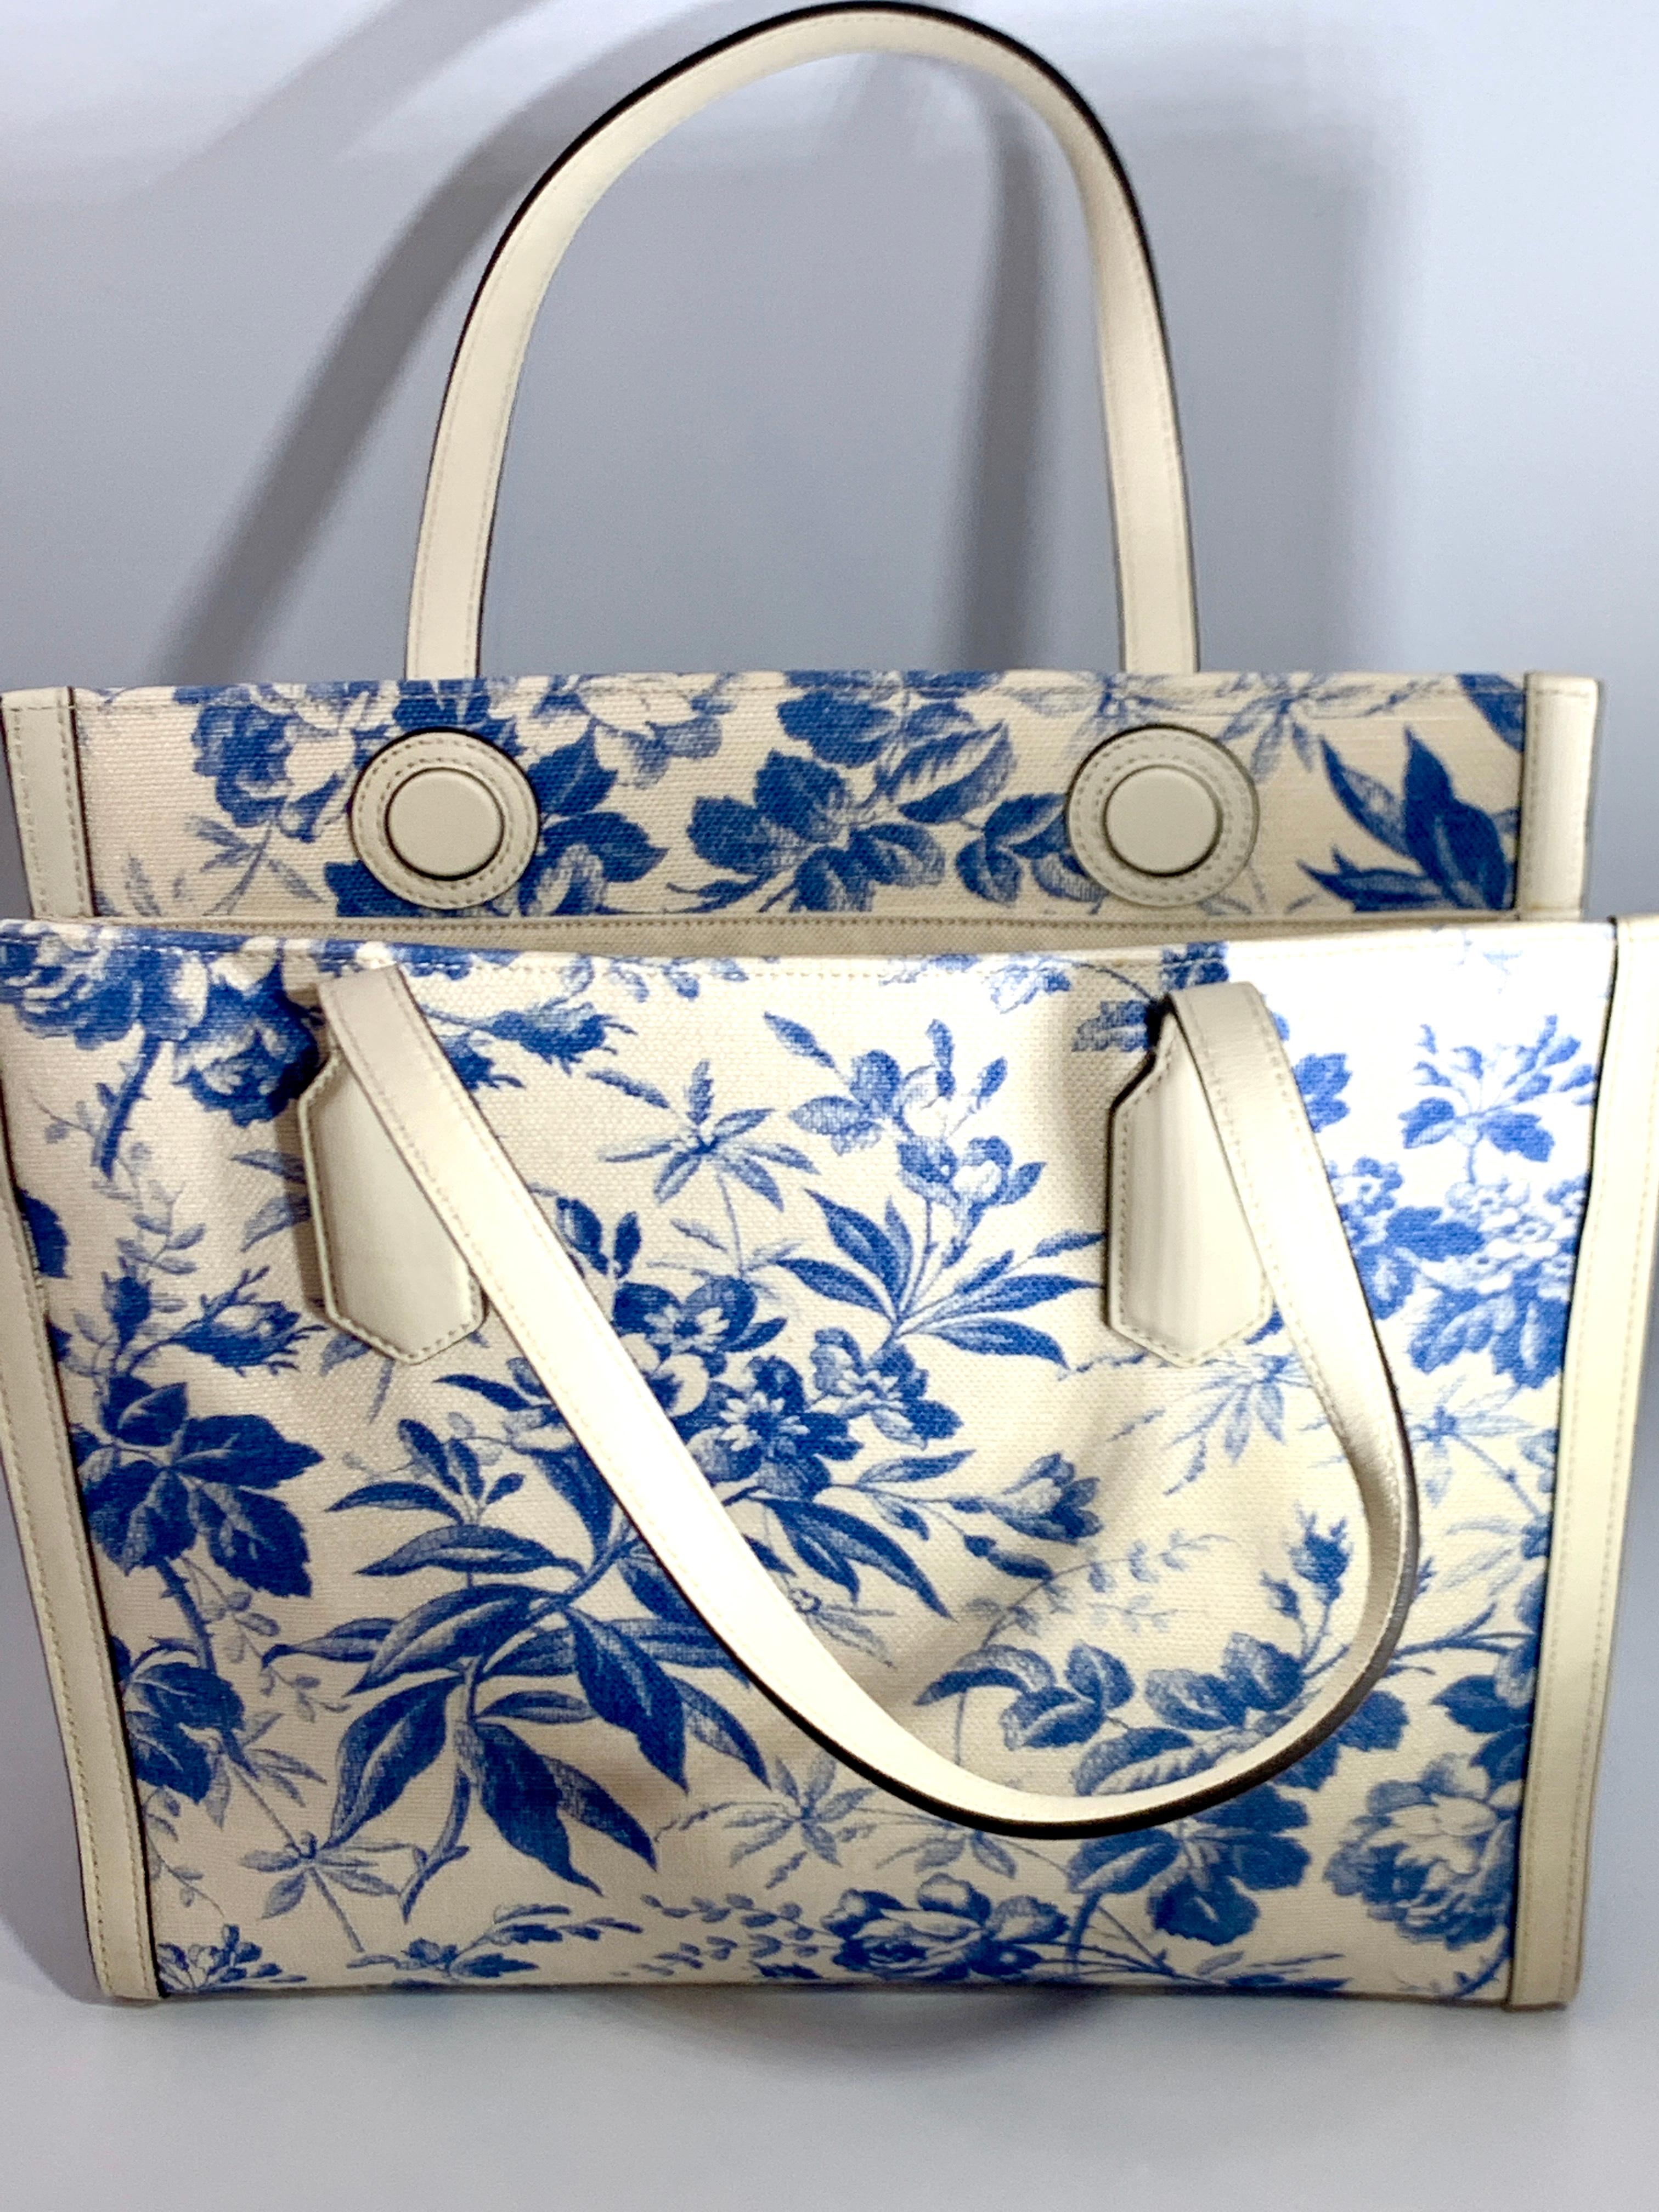  Gucci Flora Whites Canvas Leather Trim Navy Blue With Flowers  Tote Handbag  2